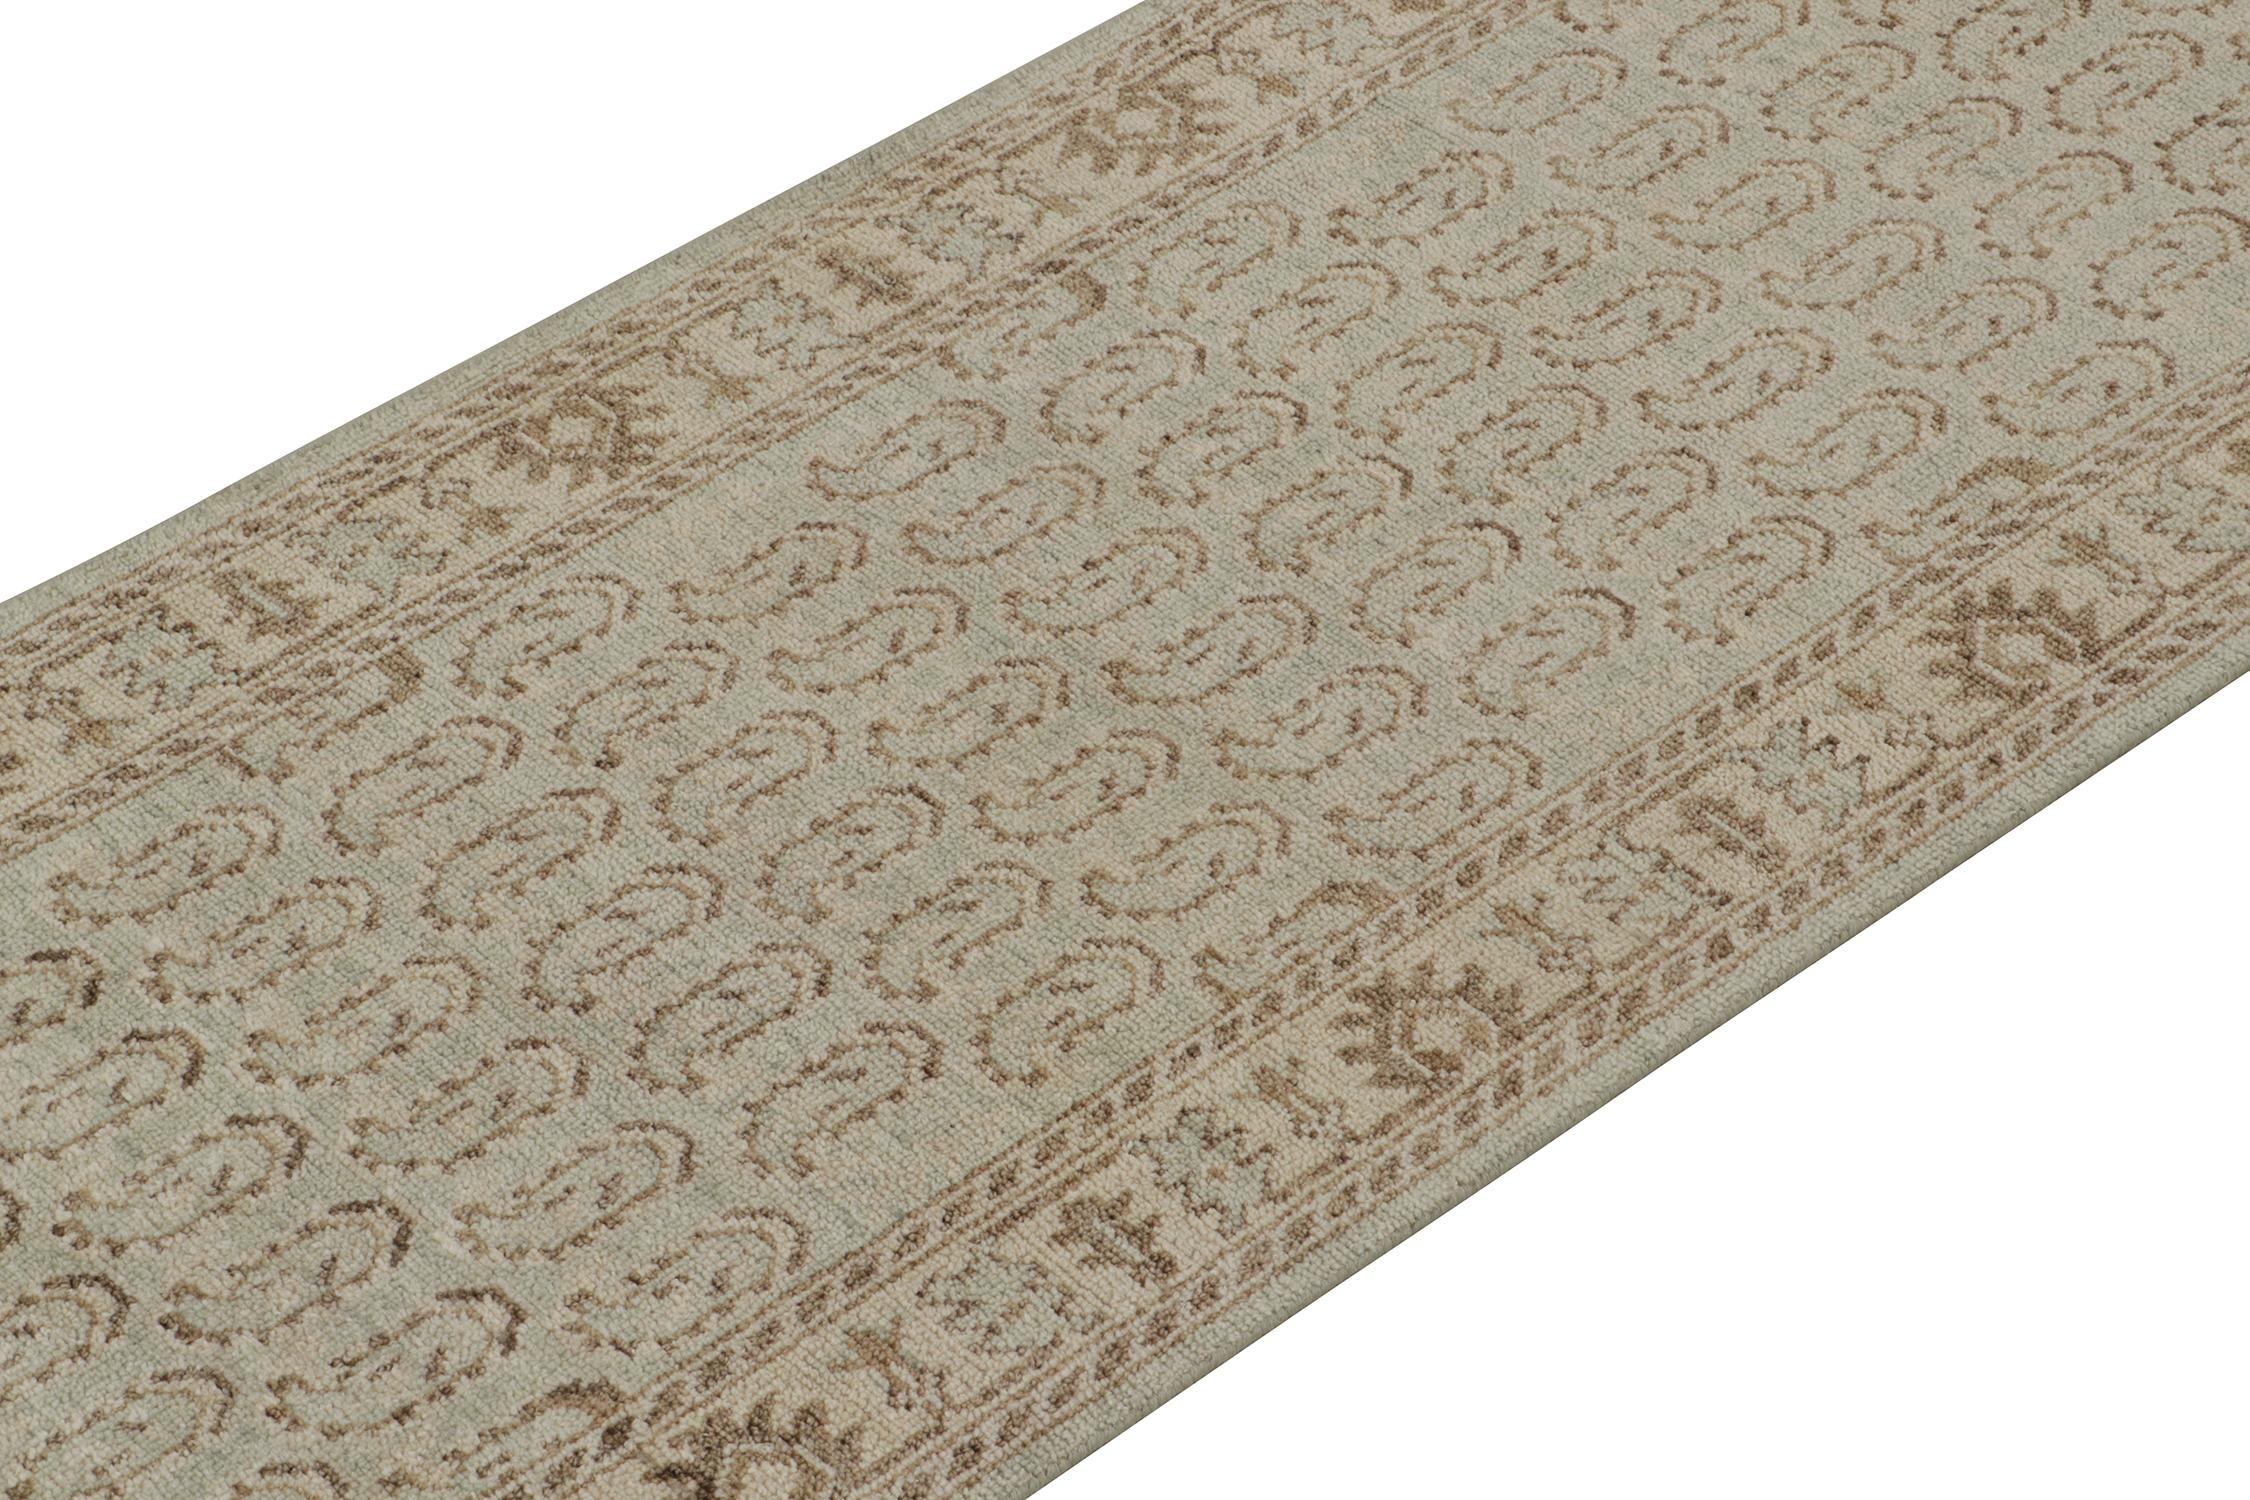 Indian Rug & Kilim’stribal Style Runner in Blue with Beige-Brown Paisley Patterns For Sale